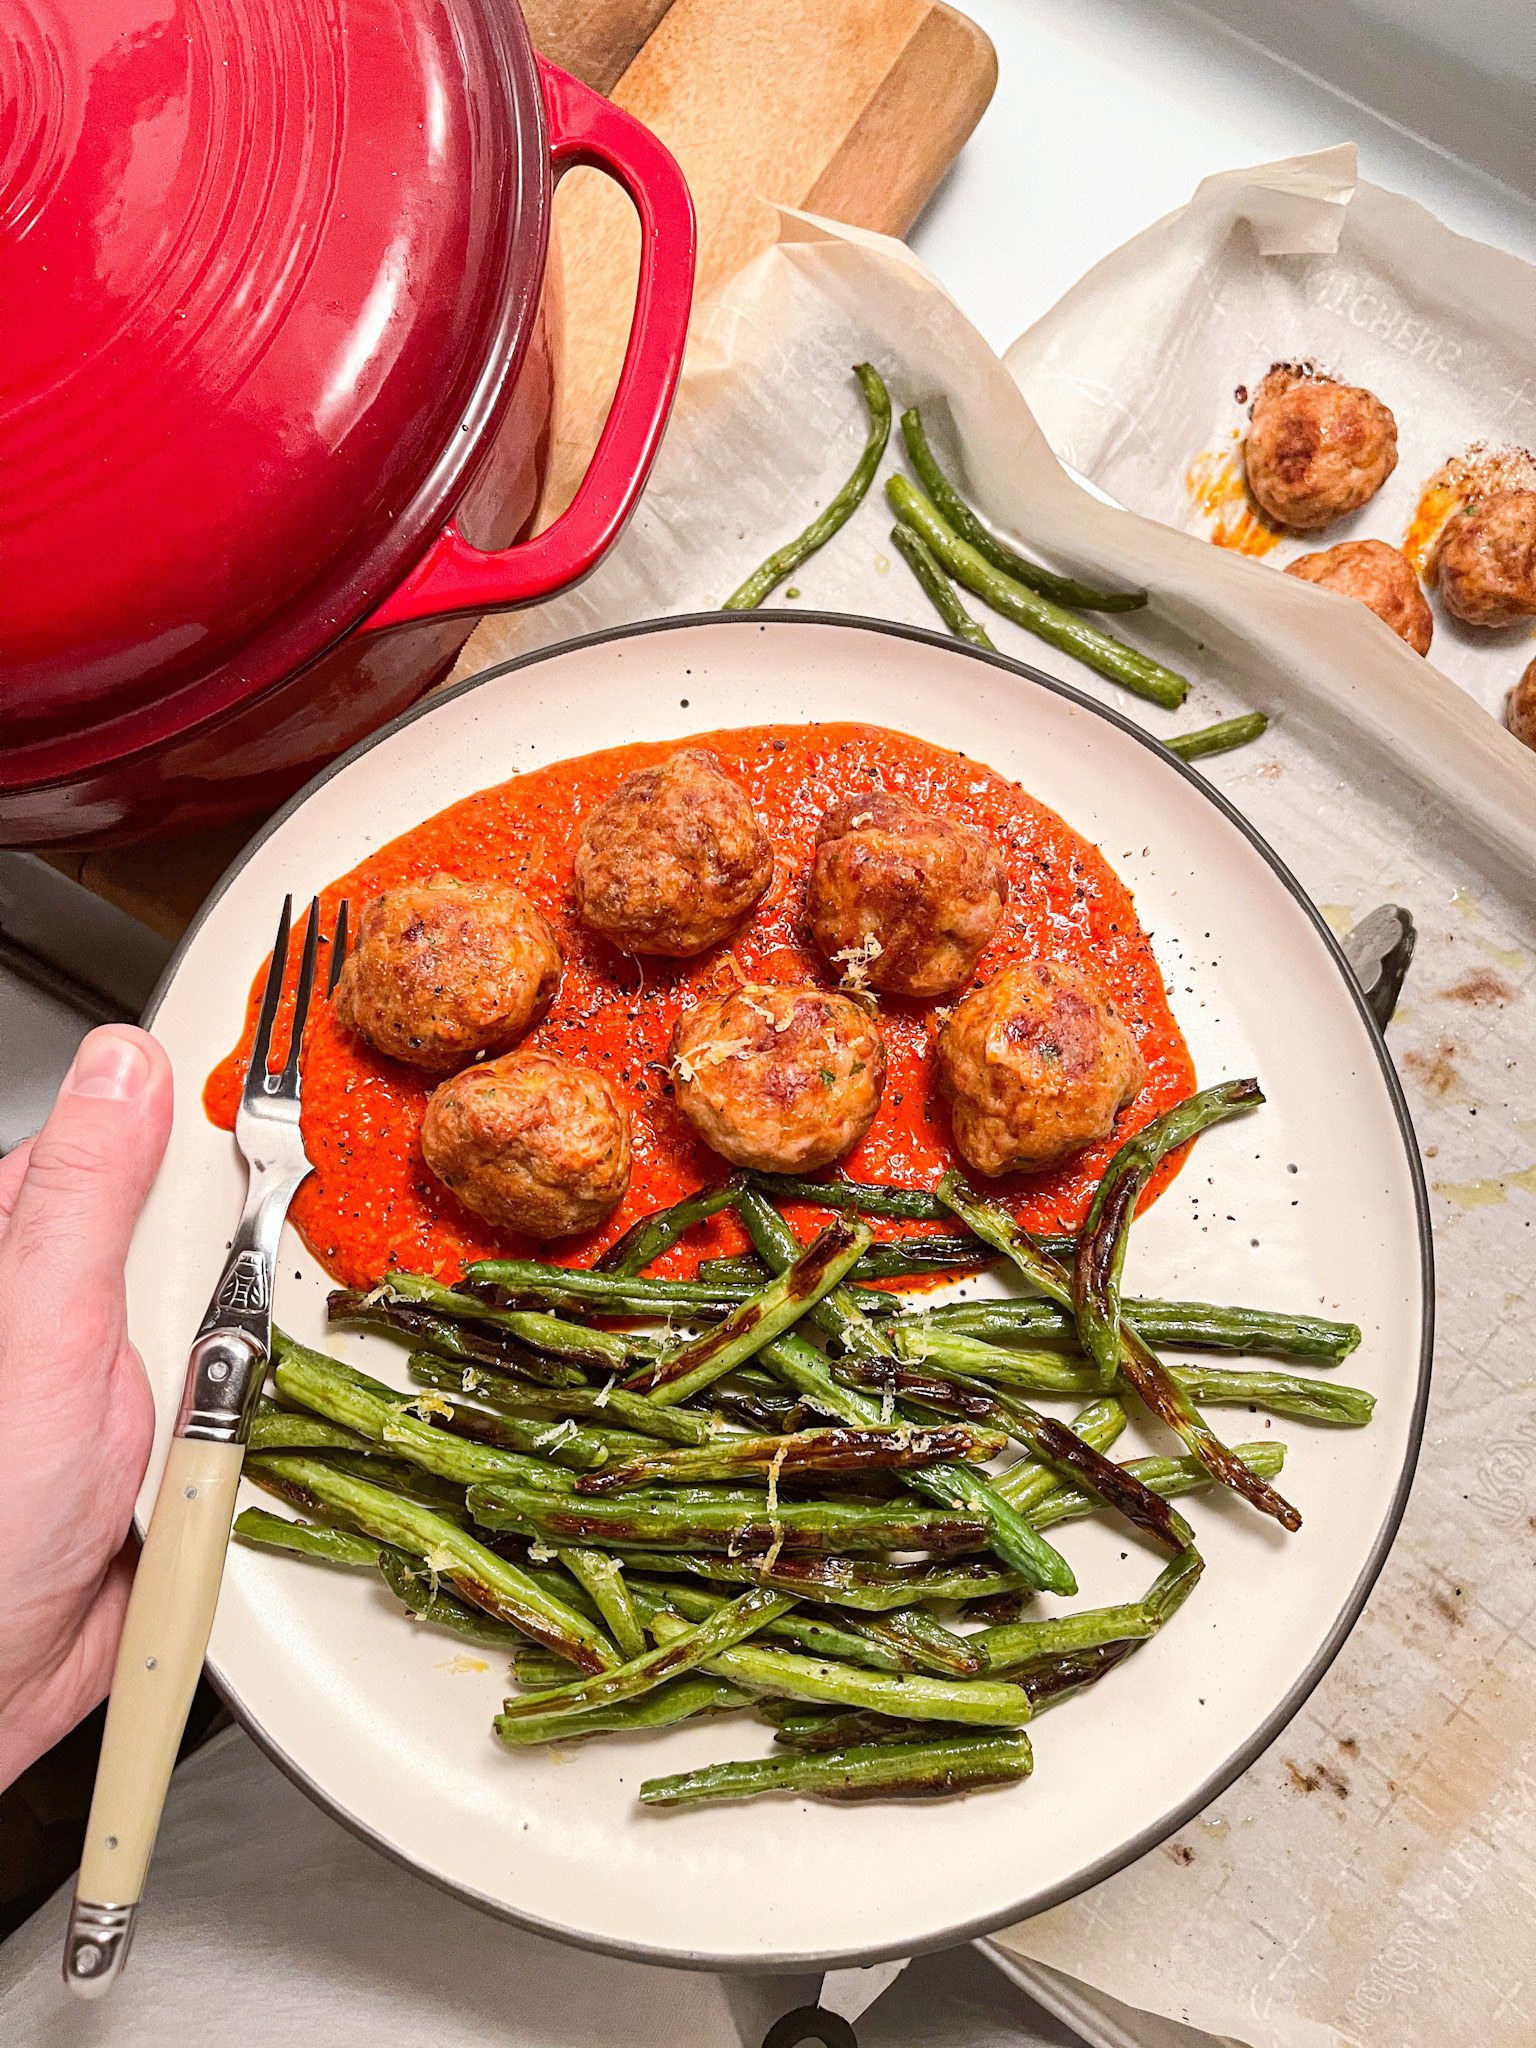 Turkey Meatballs with Romesco sauce and green beans on a plate